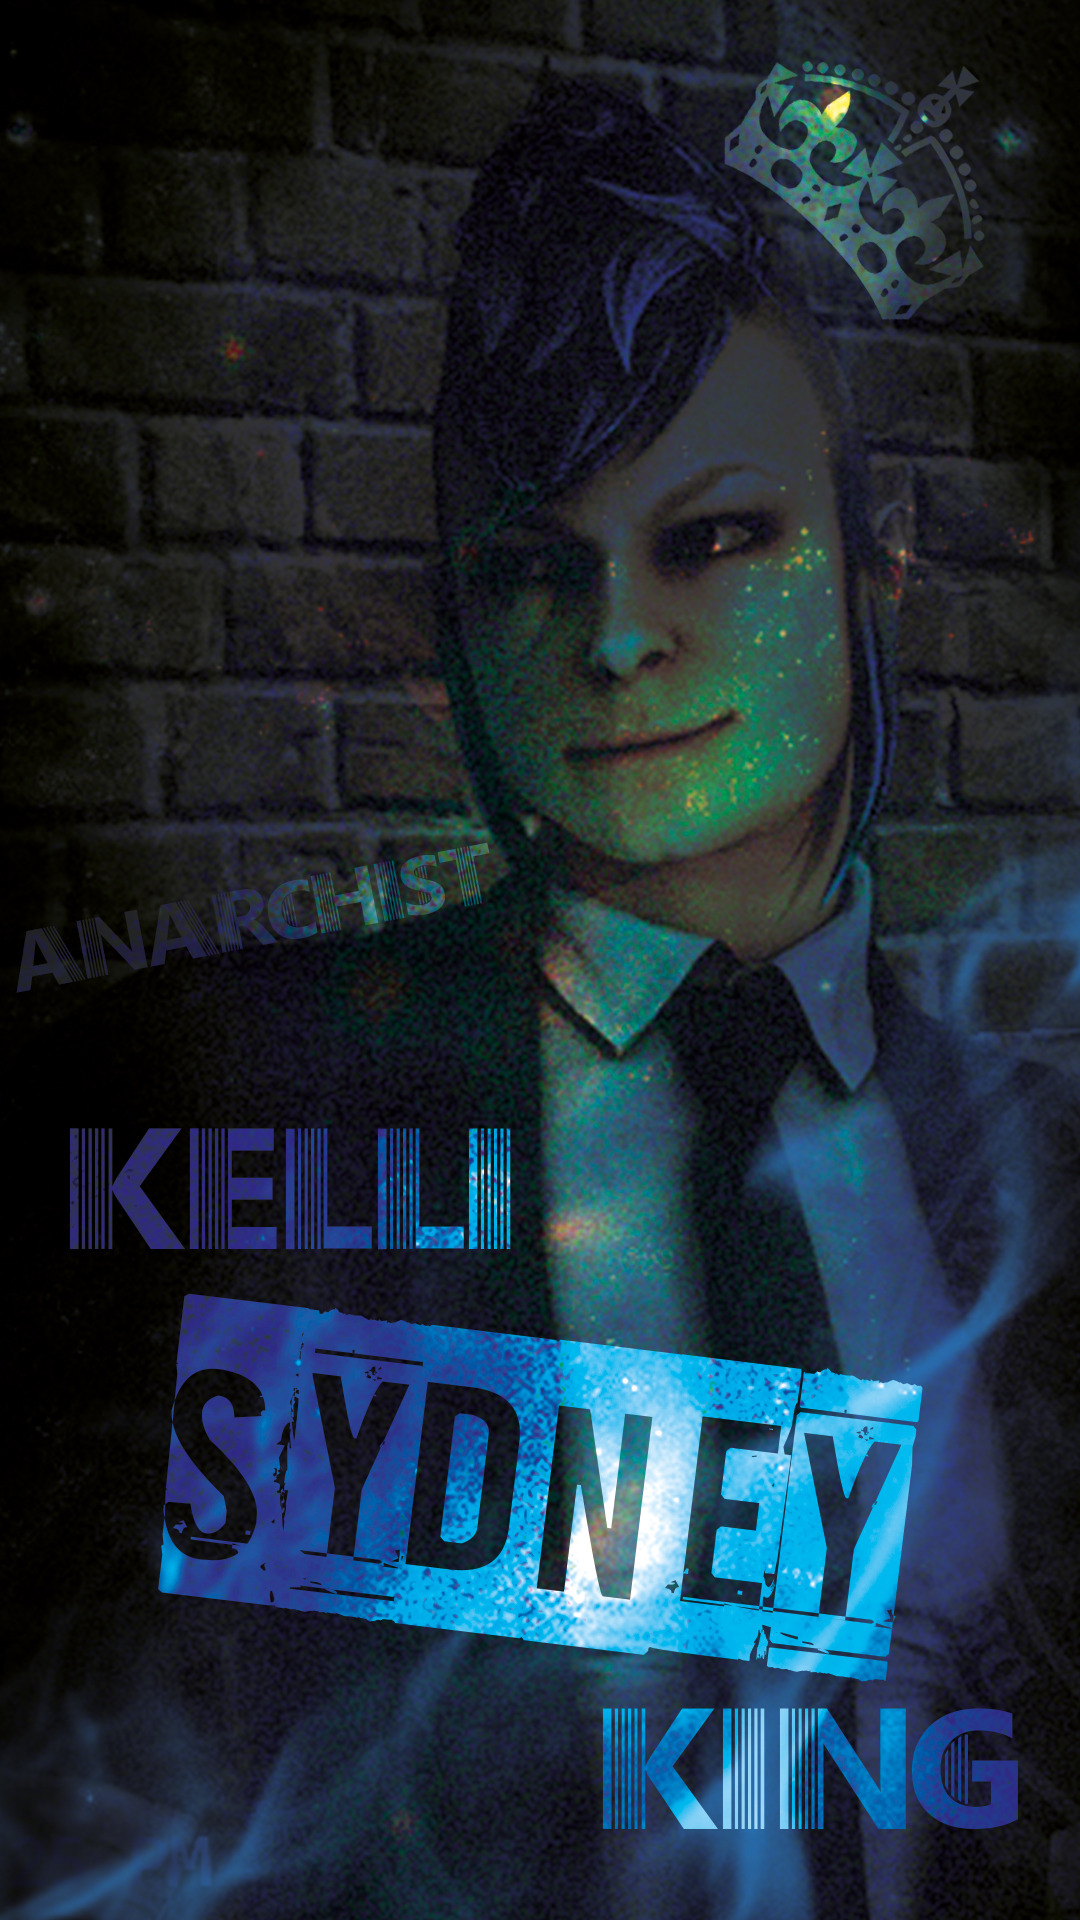 Sydney character payday 2 фото 26